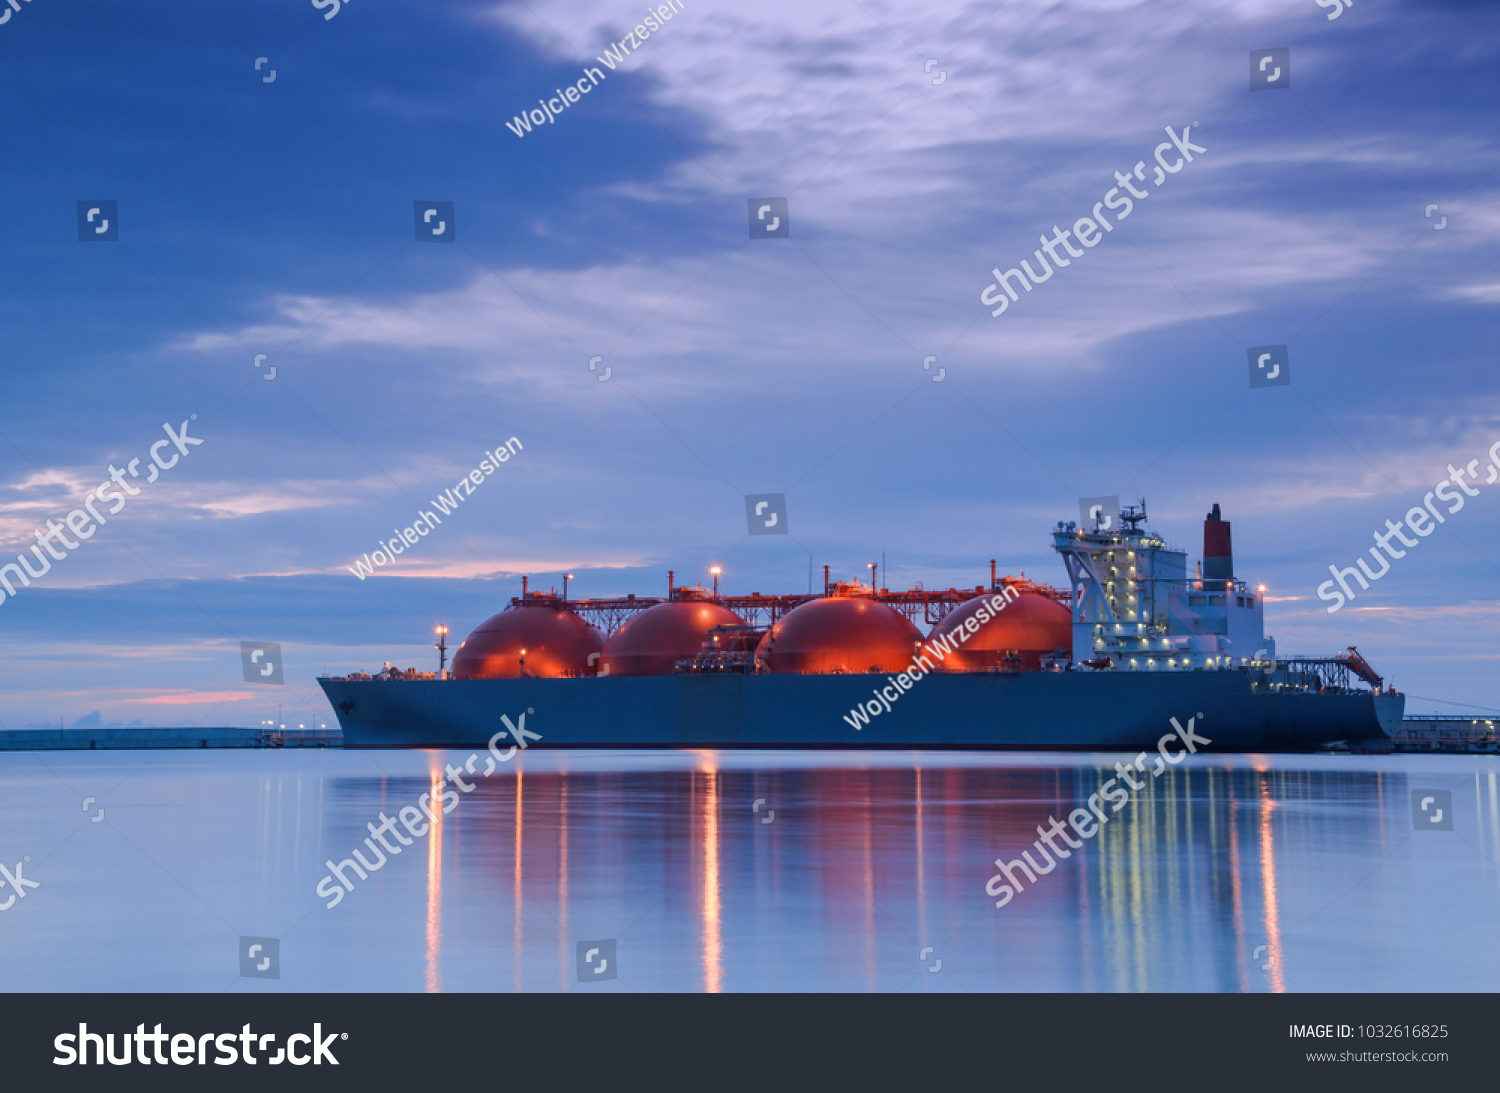 LNG TANKER AT THE GAS TERMINAL - Sunrise over the ship and port #1032616825